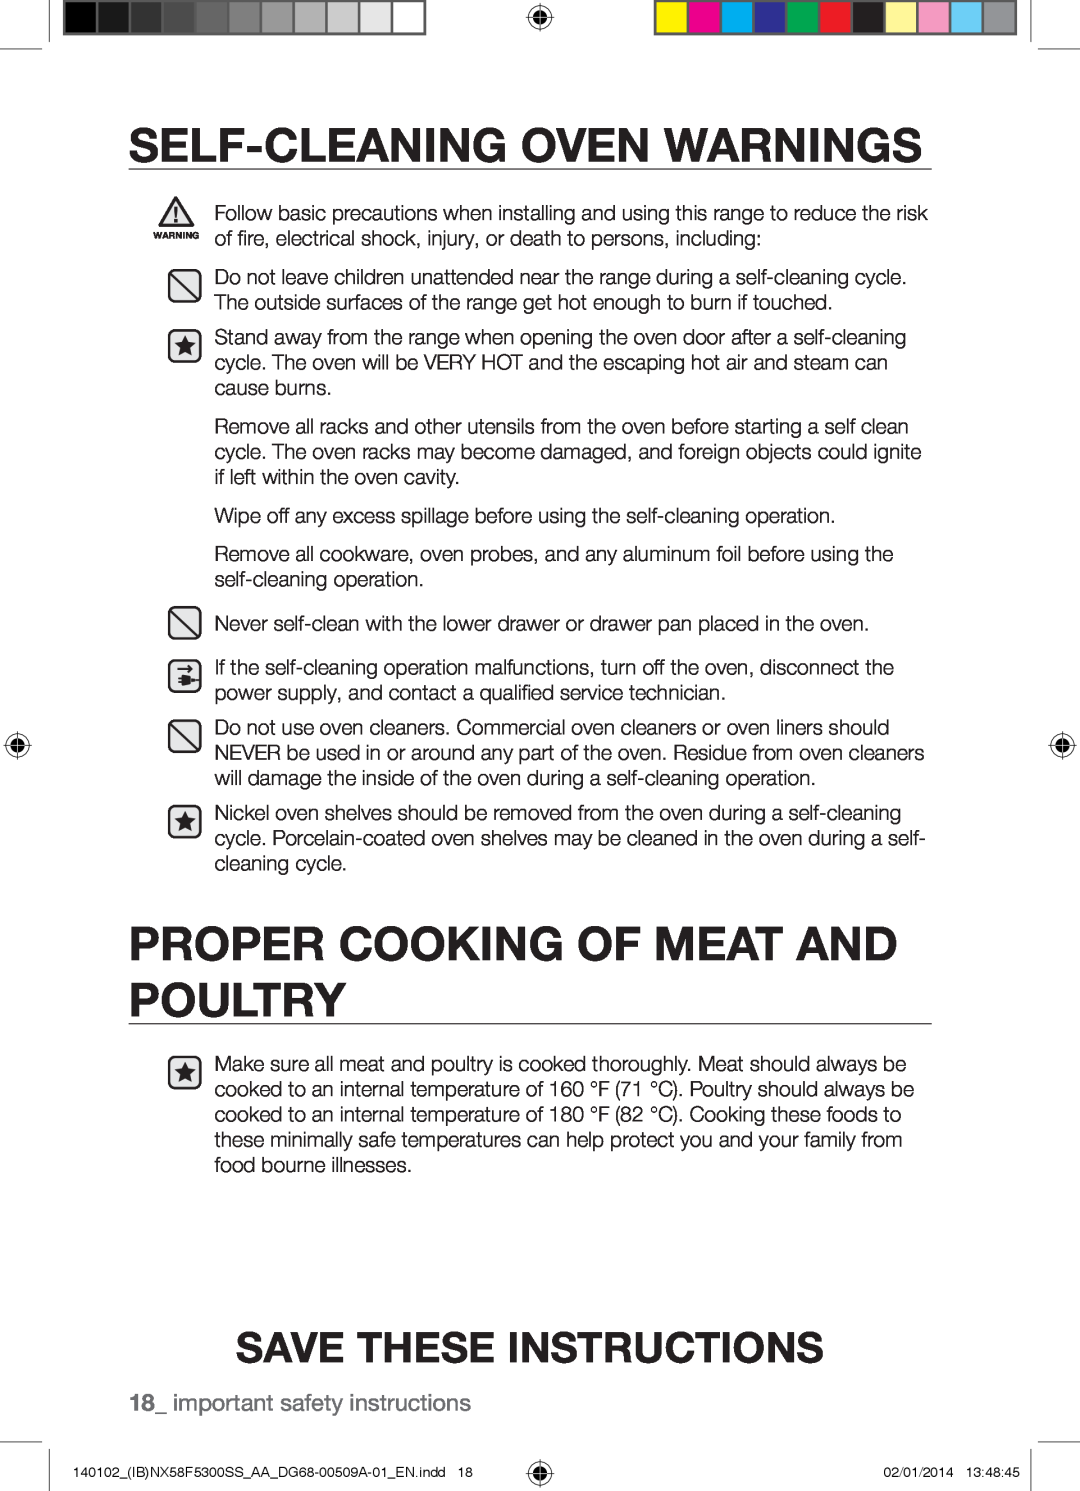 Samsung NX58F5500SW user manual Self-Cleaning Oven Warnings, Proper Cooking Of Meat And Poultry, Save These Instructions 